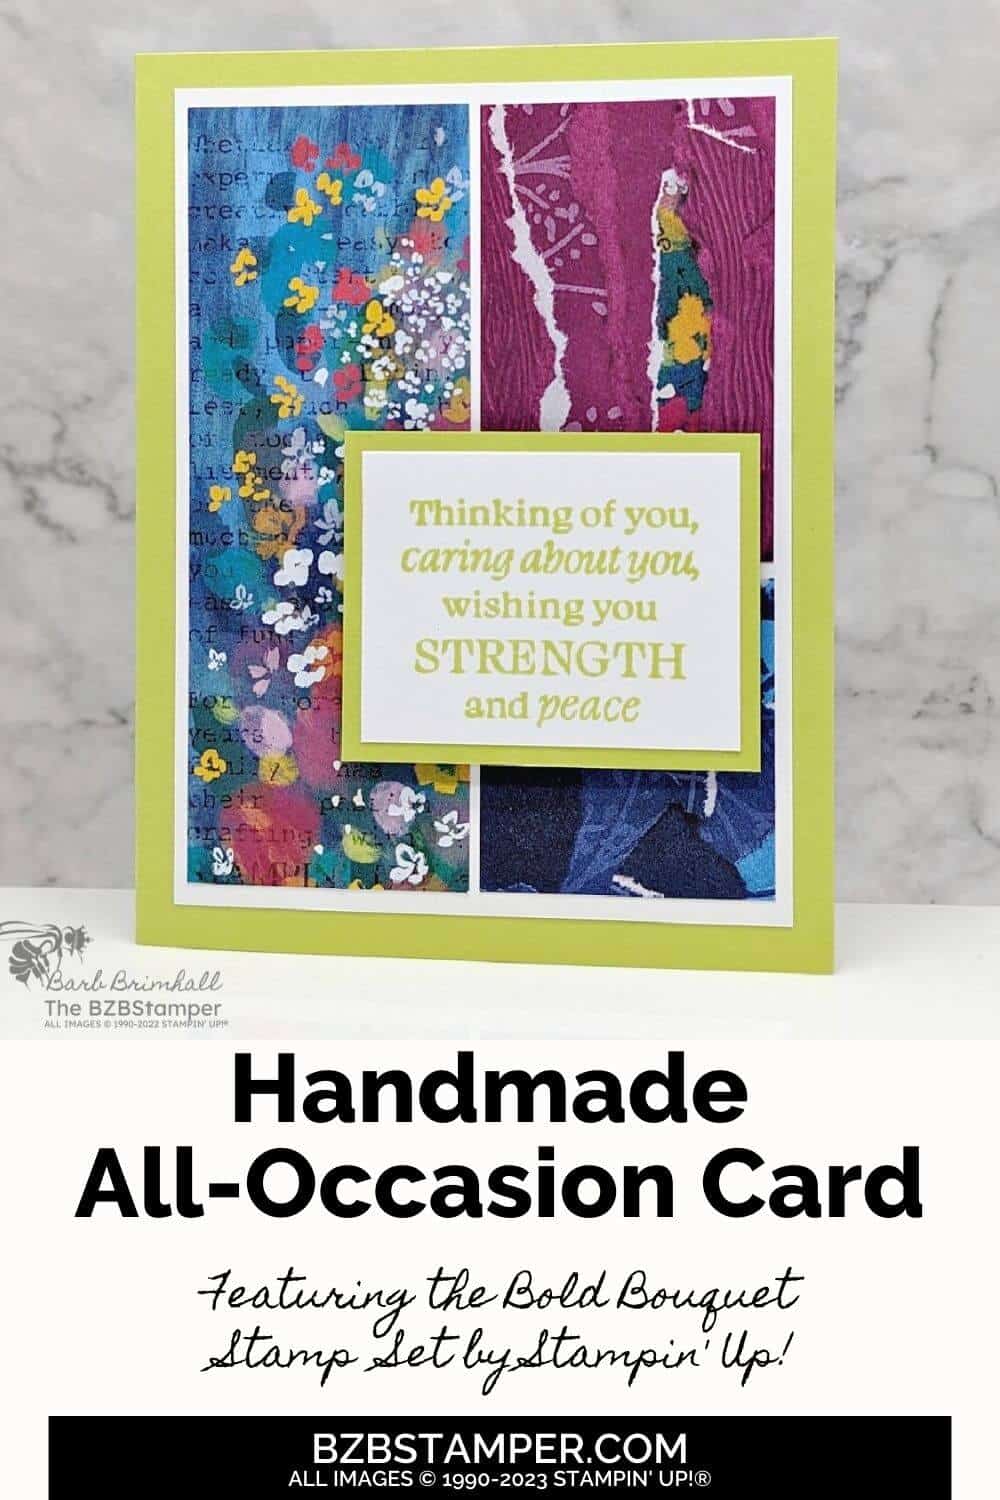 090223 stampin up bold bouquet pin1